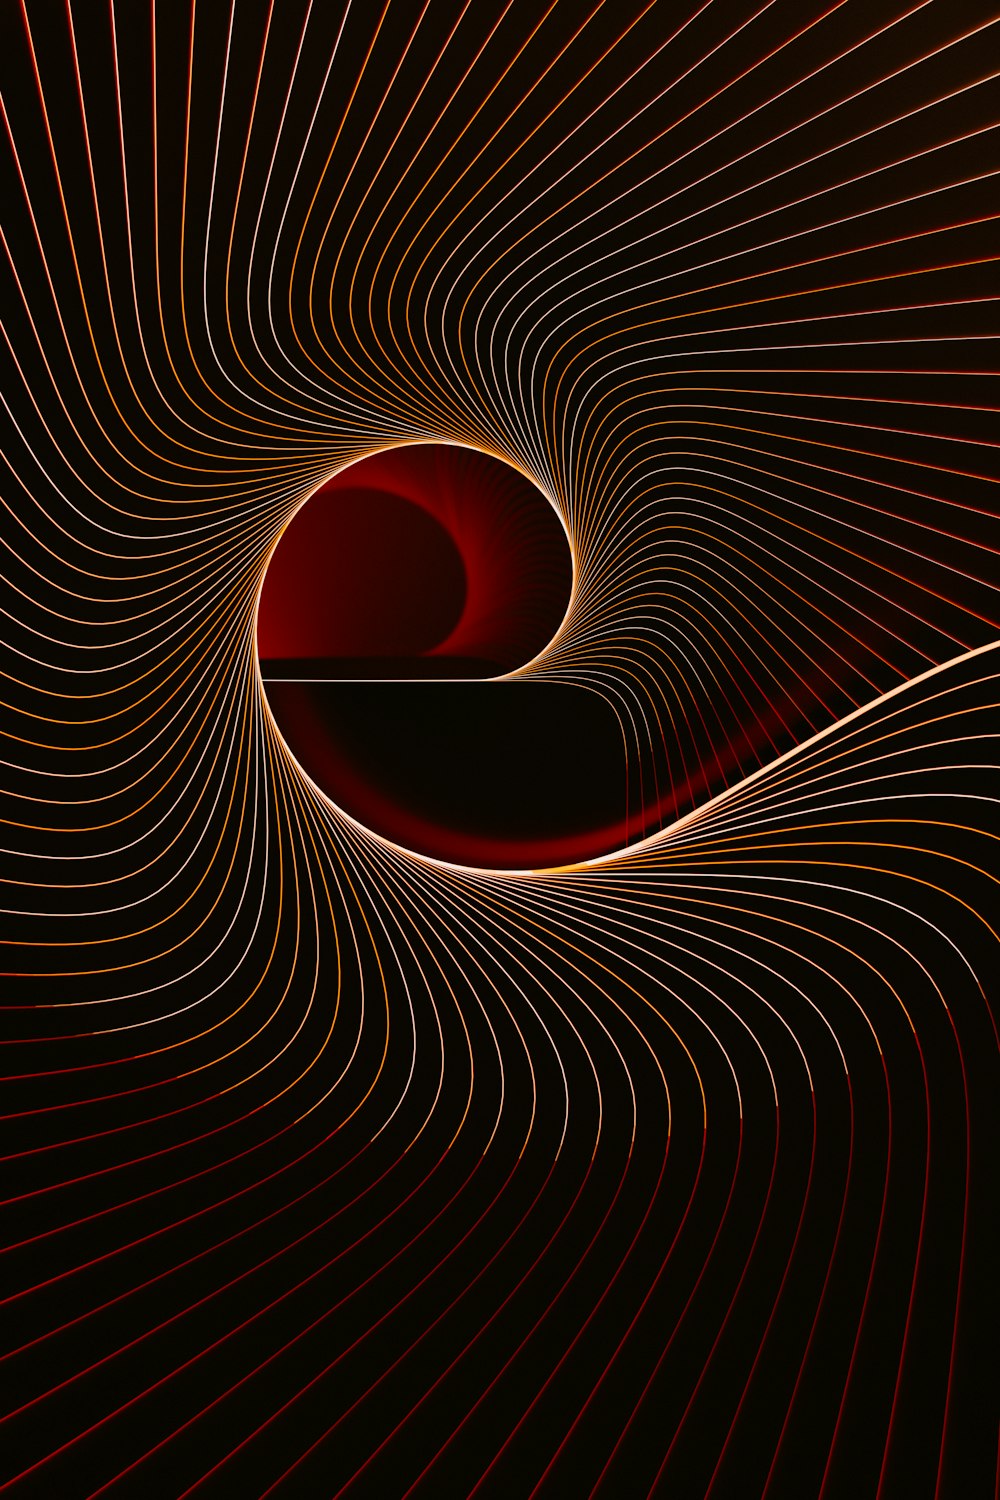 a computer generated image of a red swirl